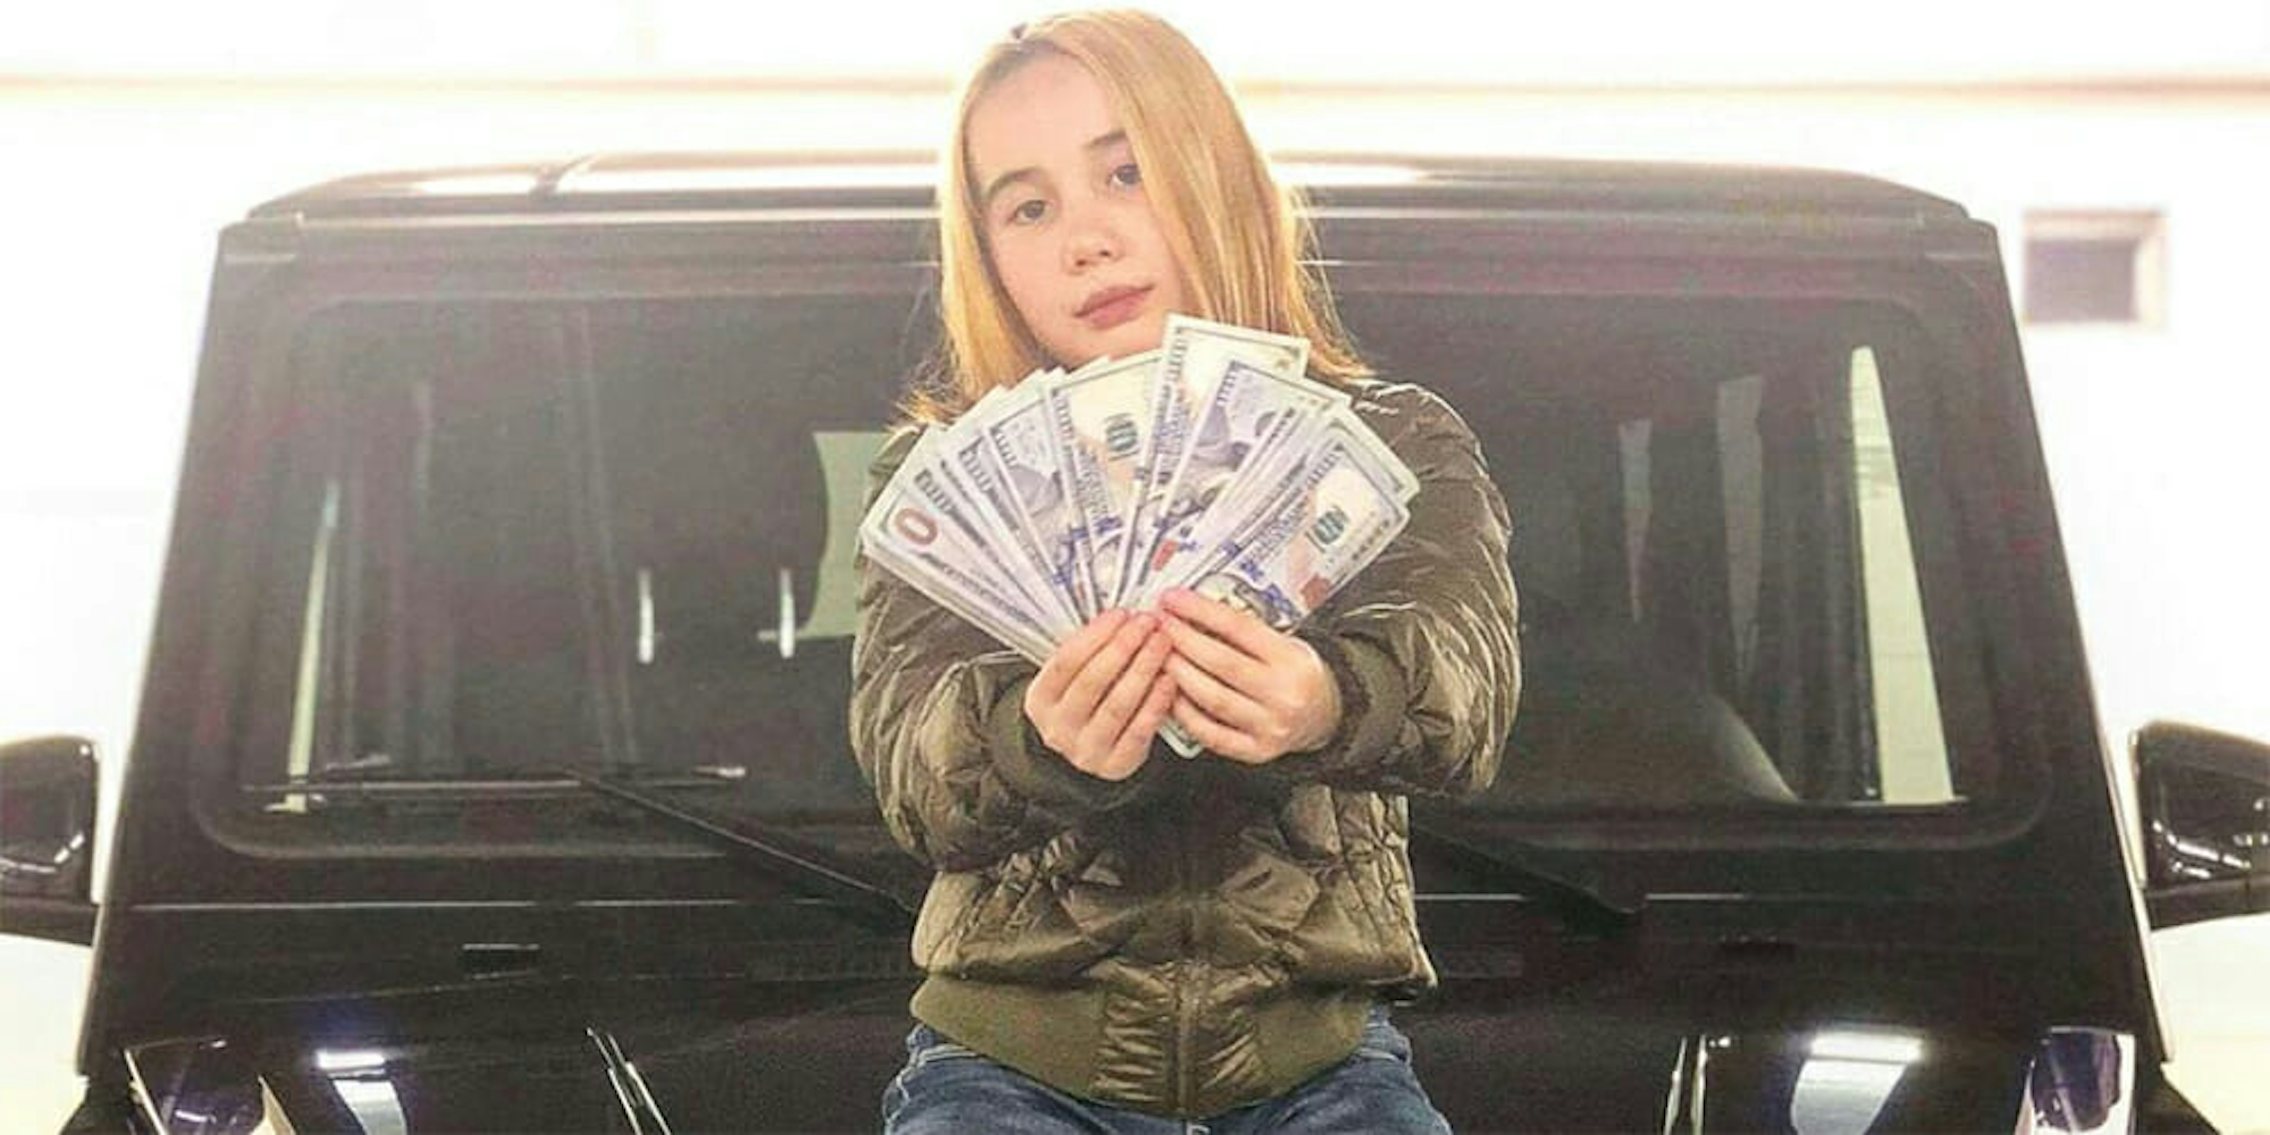 Lil Tay's mom reportedly let her daughter film a car and a penthouse for Instagram videos without the owners' permission.